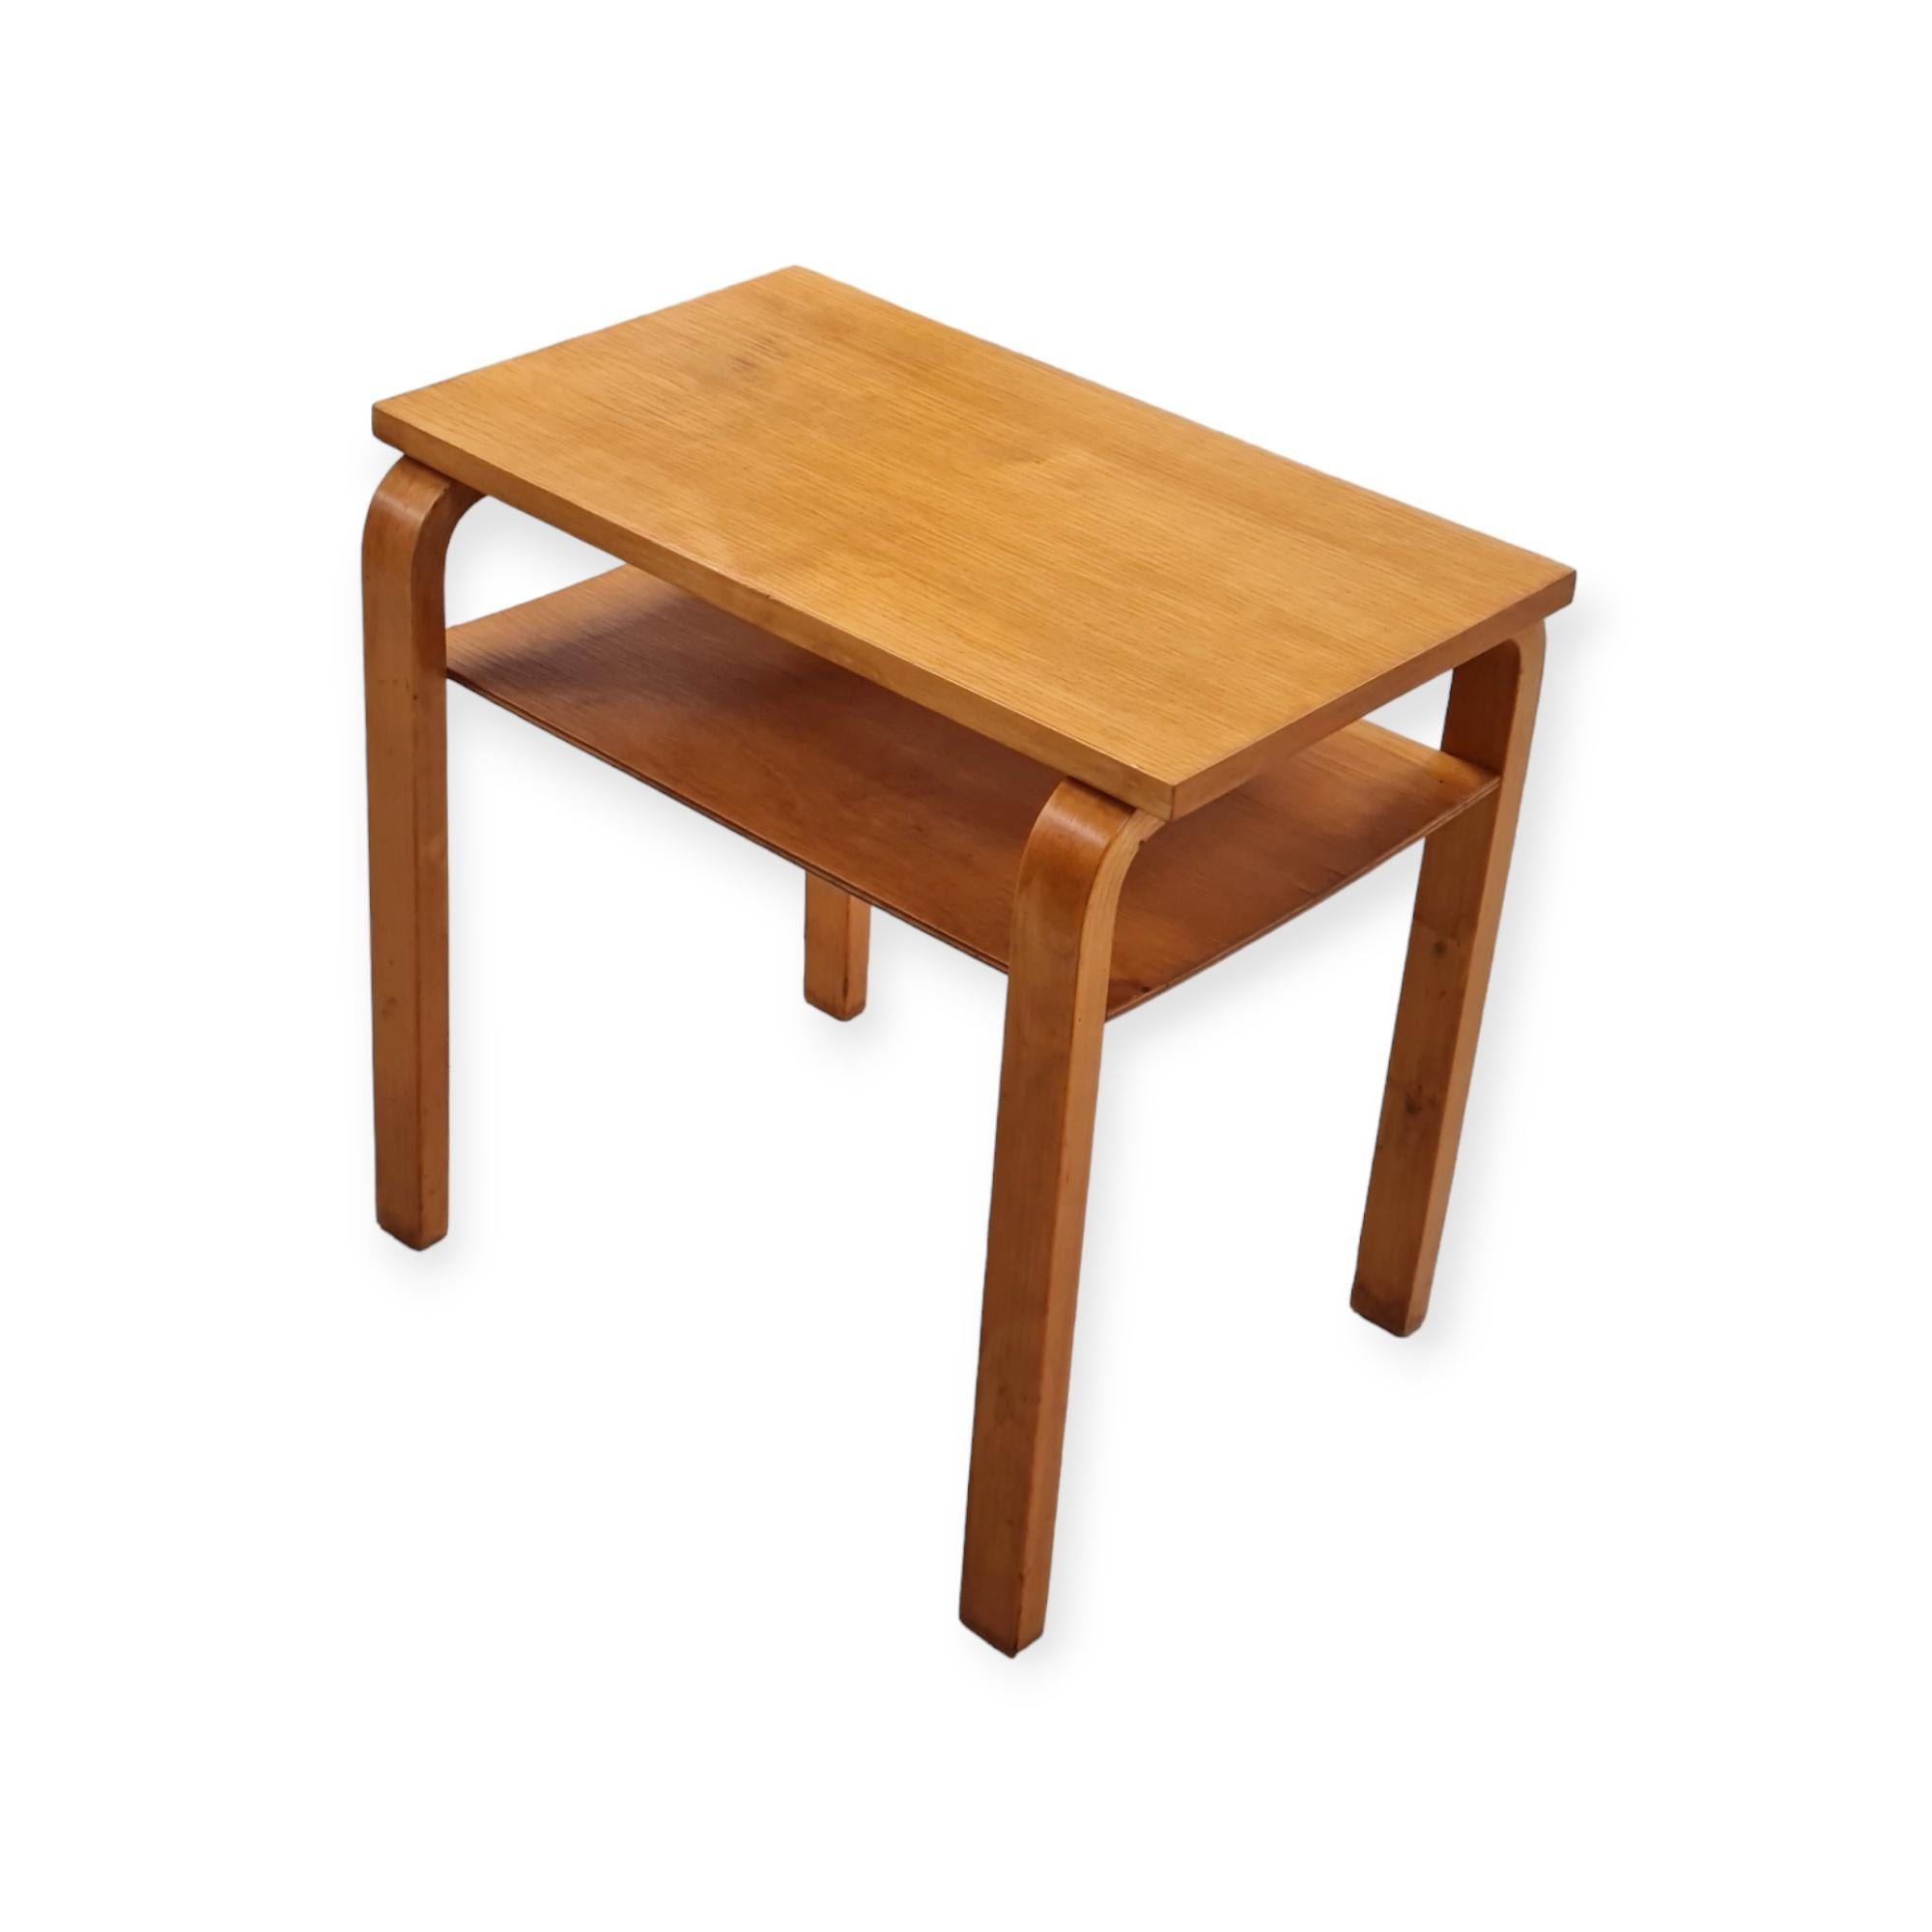 This small size side table can be used in any room, and for a variety of purposes. The shelf feature makes it perfect as an arm chair or reading space side table. The vintage honey like colour patina is absolutely stunning. The table is in very good